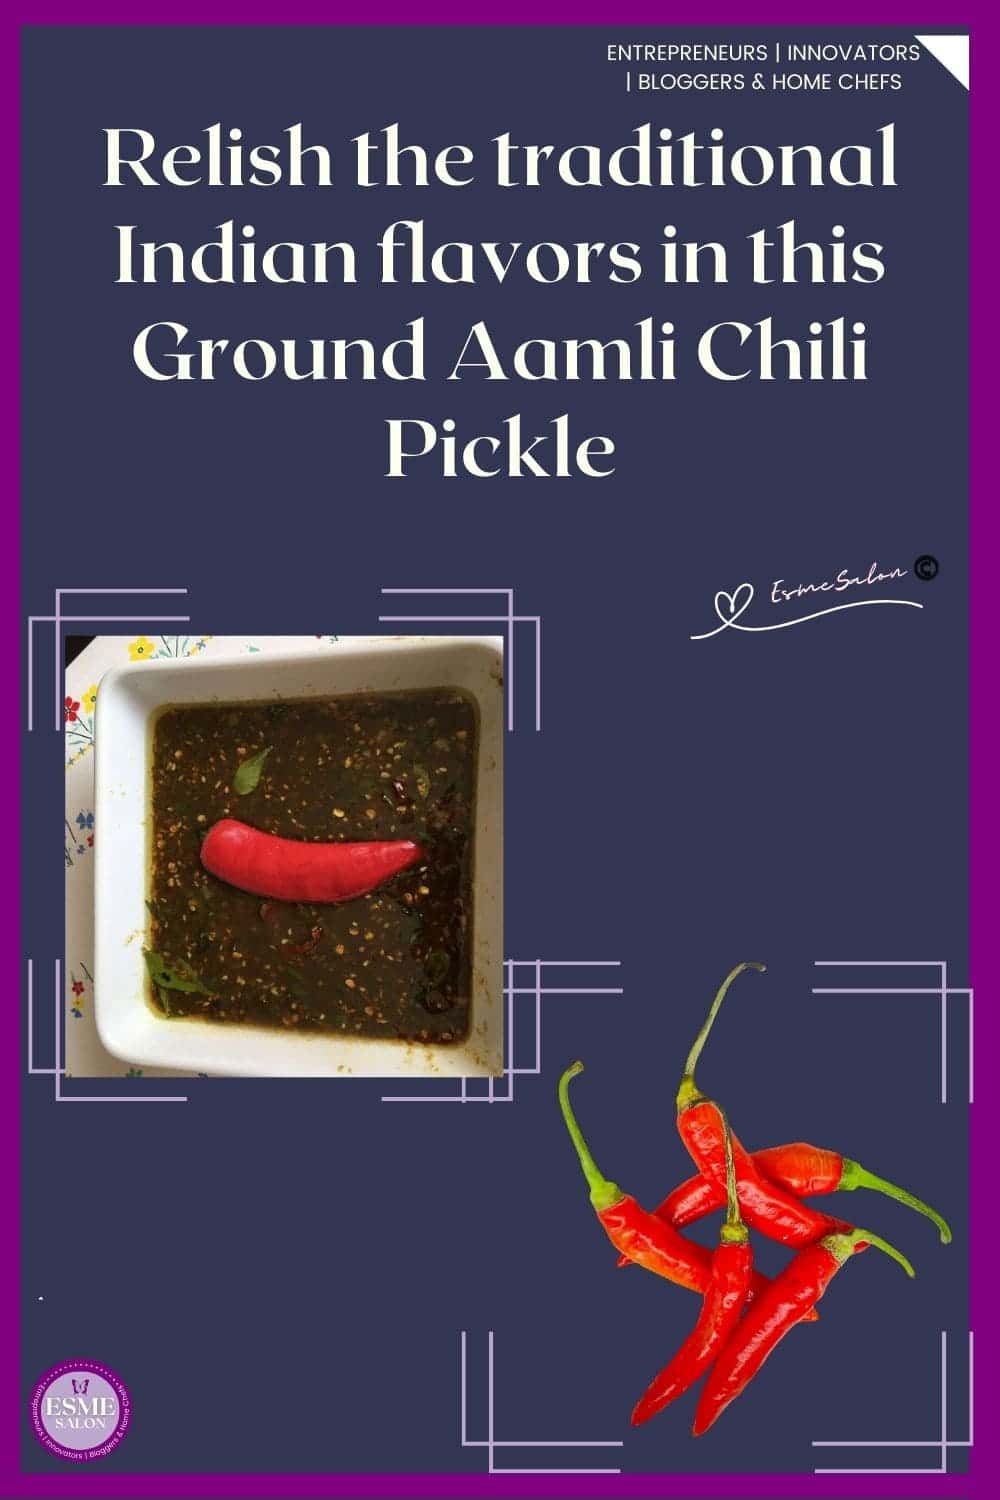 an image of a square white dish filled with Sweet And Sour Ground Aamli Chili Pickle (Tamarind) and a red chili as decoration